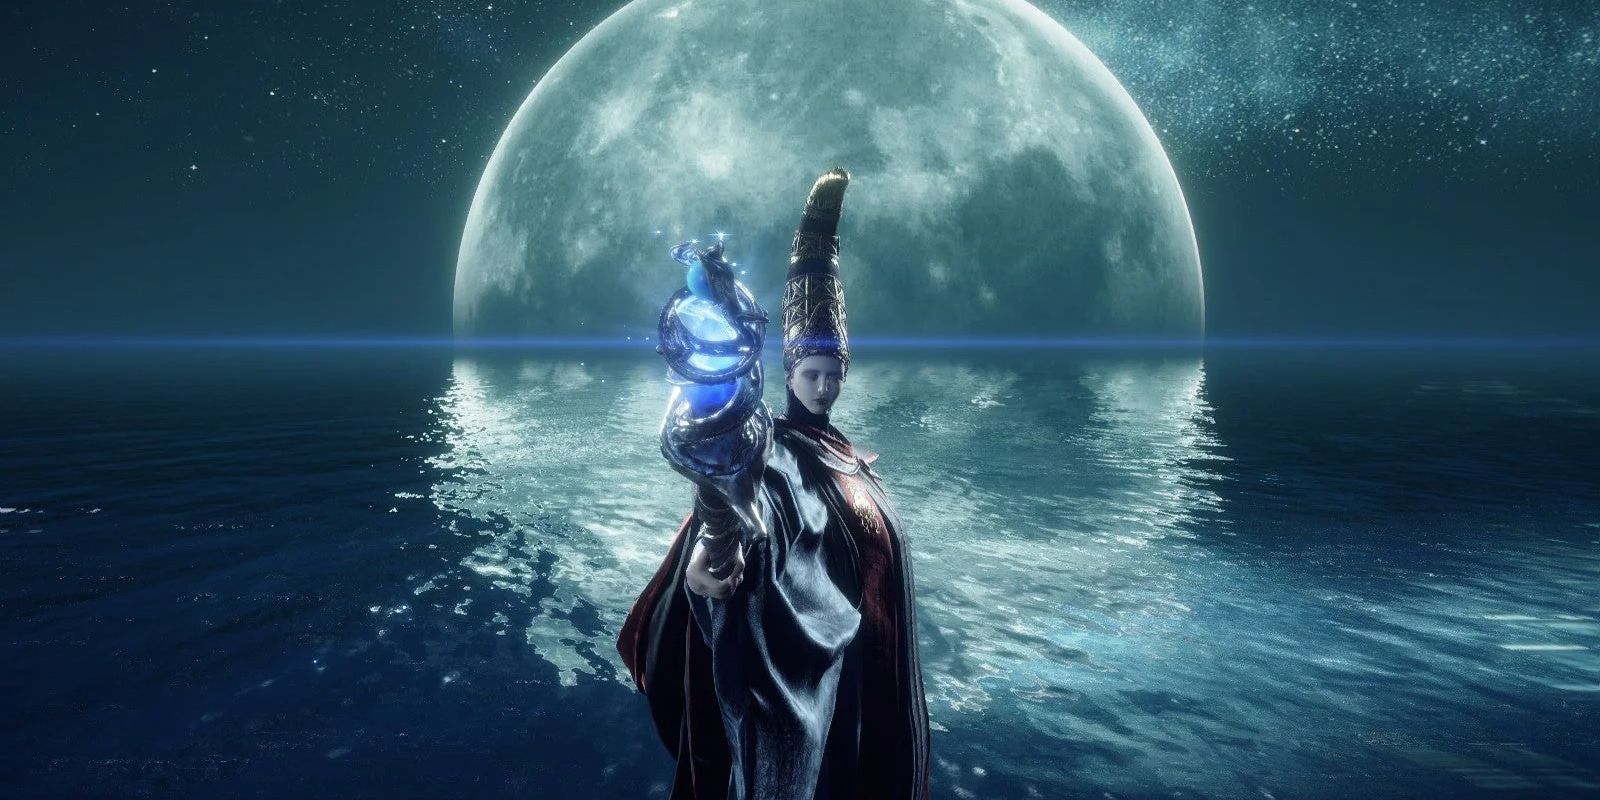 Rennala, Queen of the Full Moon, a boss from Elden Ring, with the moon setting in the background.